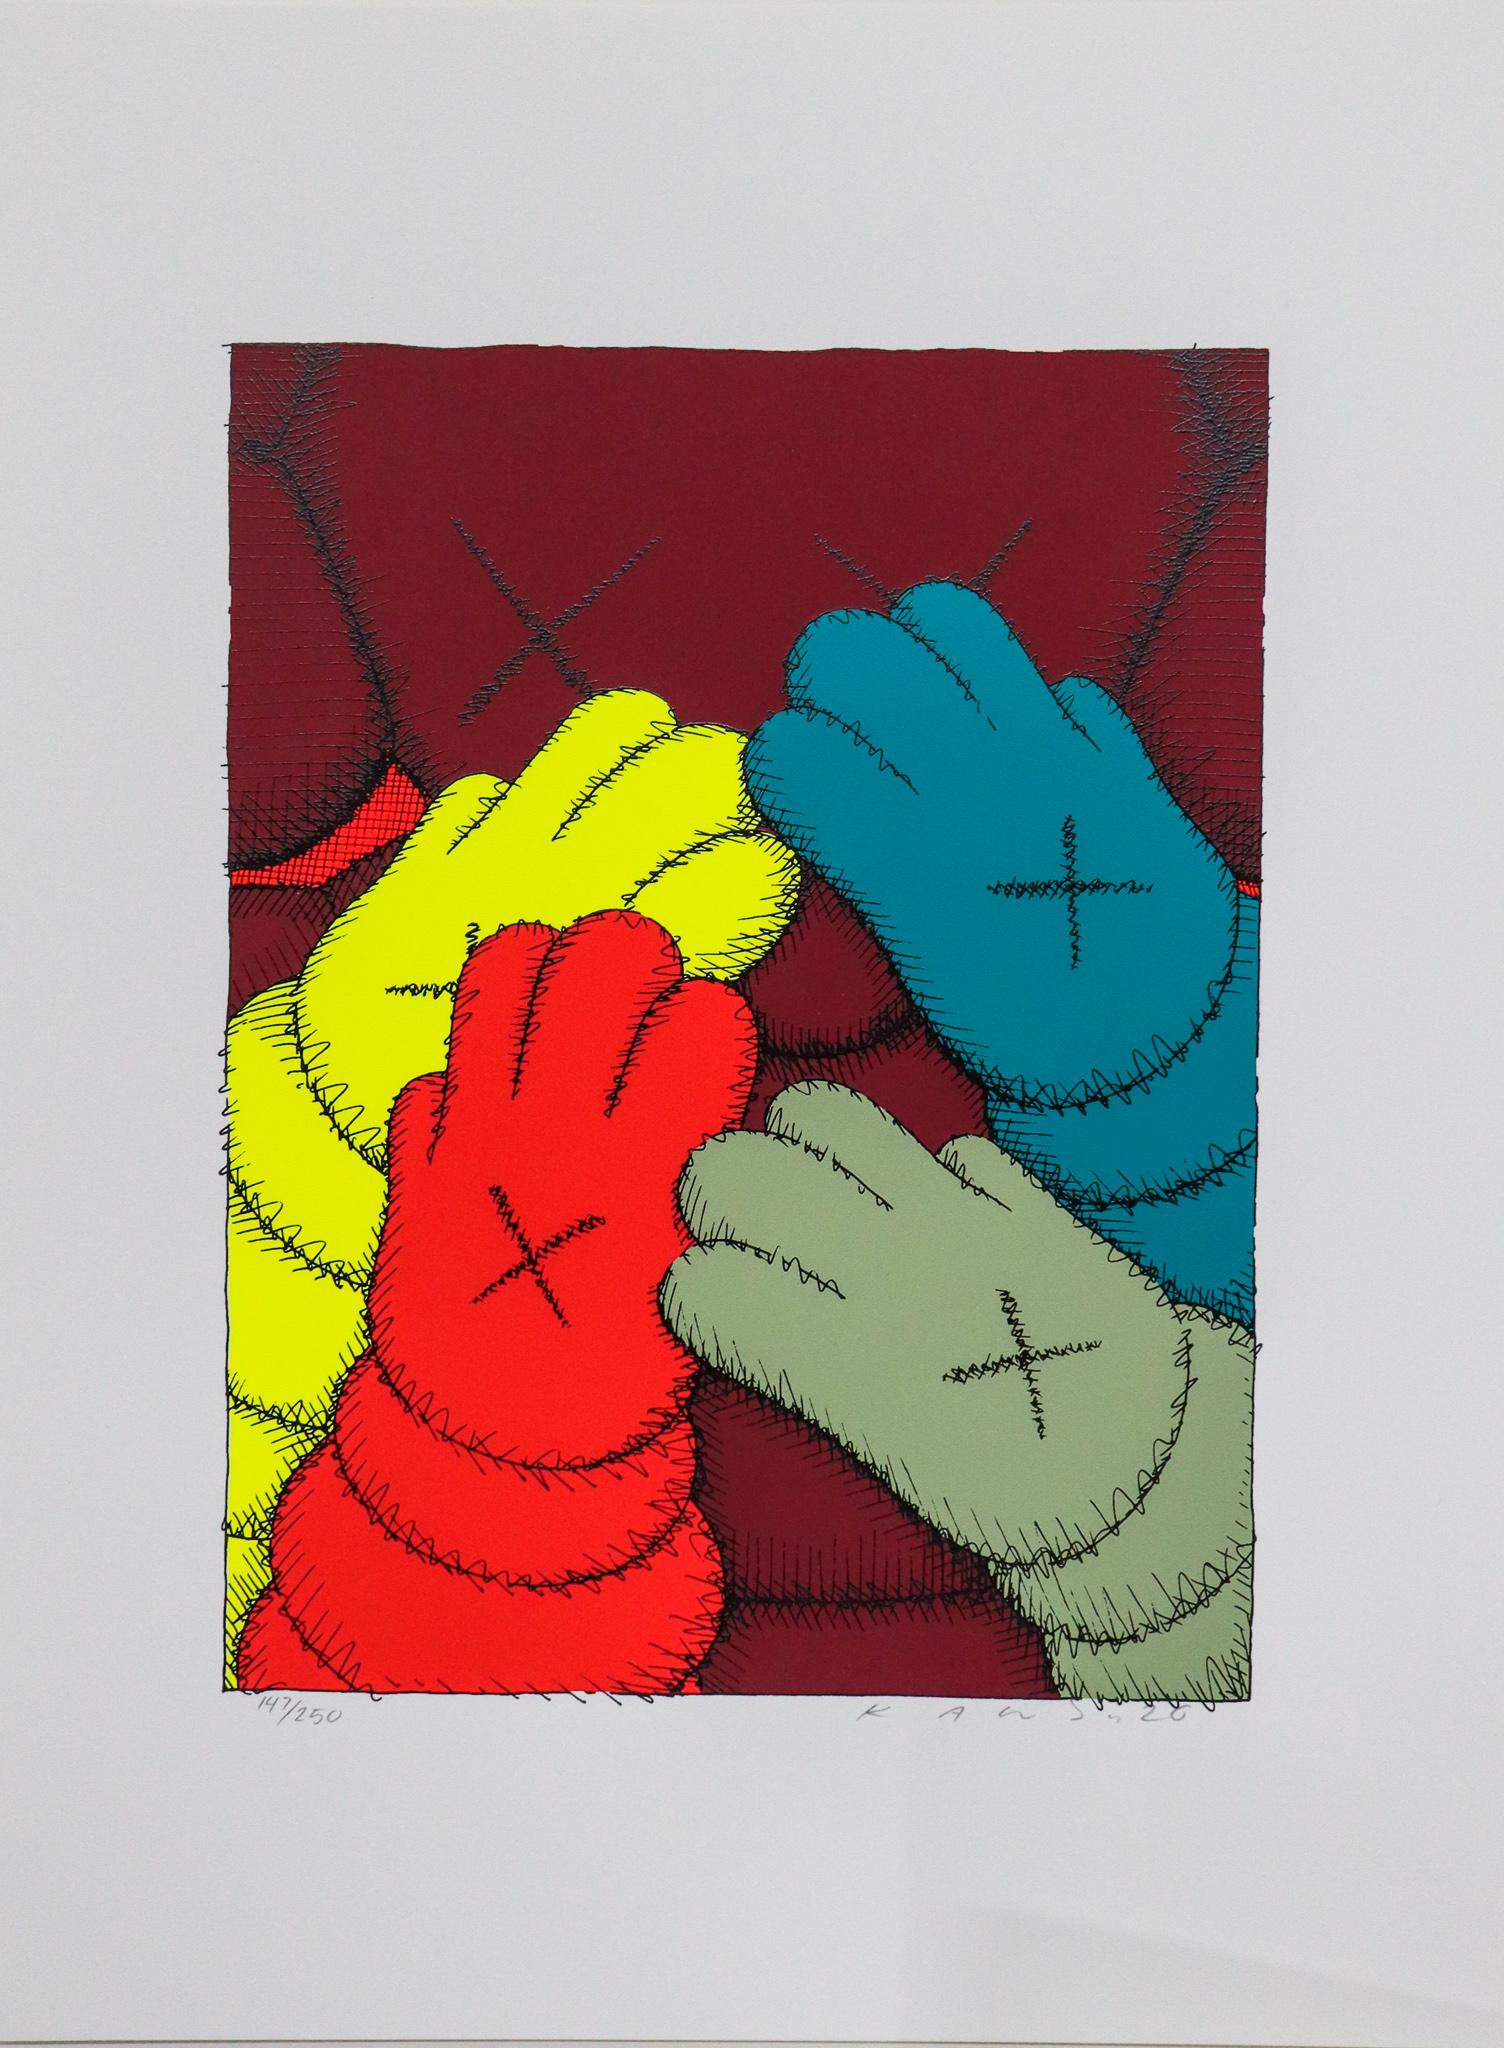 KAWS
Untitled from Urge (Dark Red)
From the rare limited edition of 250
Original Screen print on paper
Hand signed and numbered
MINT Condition
